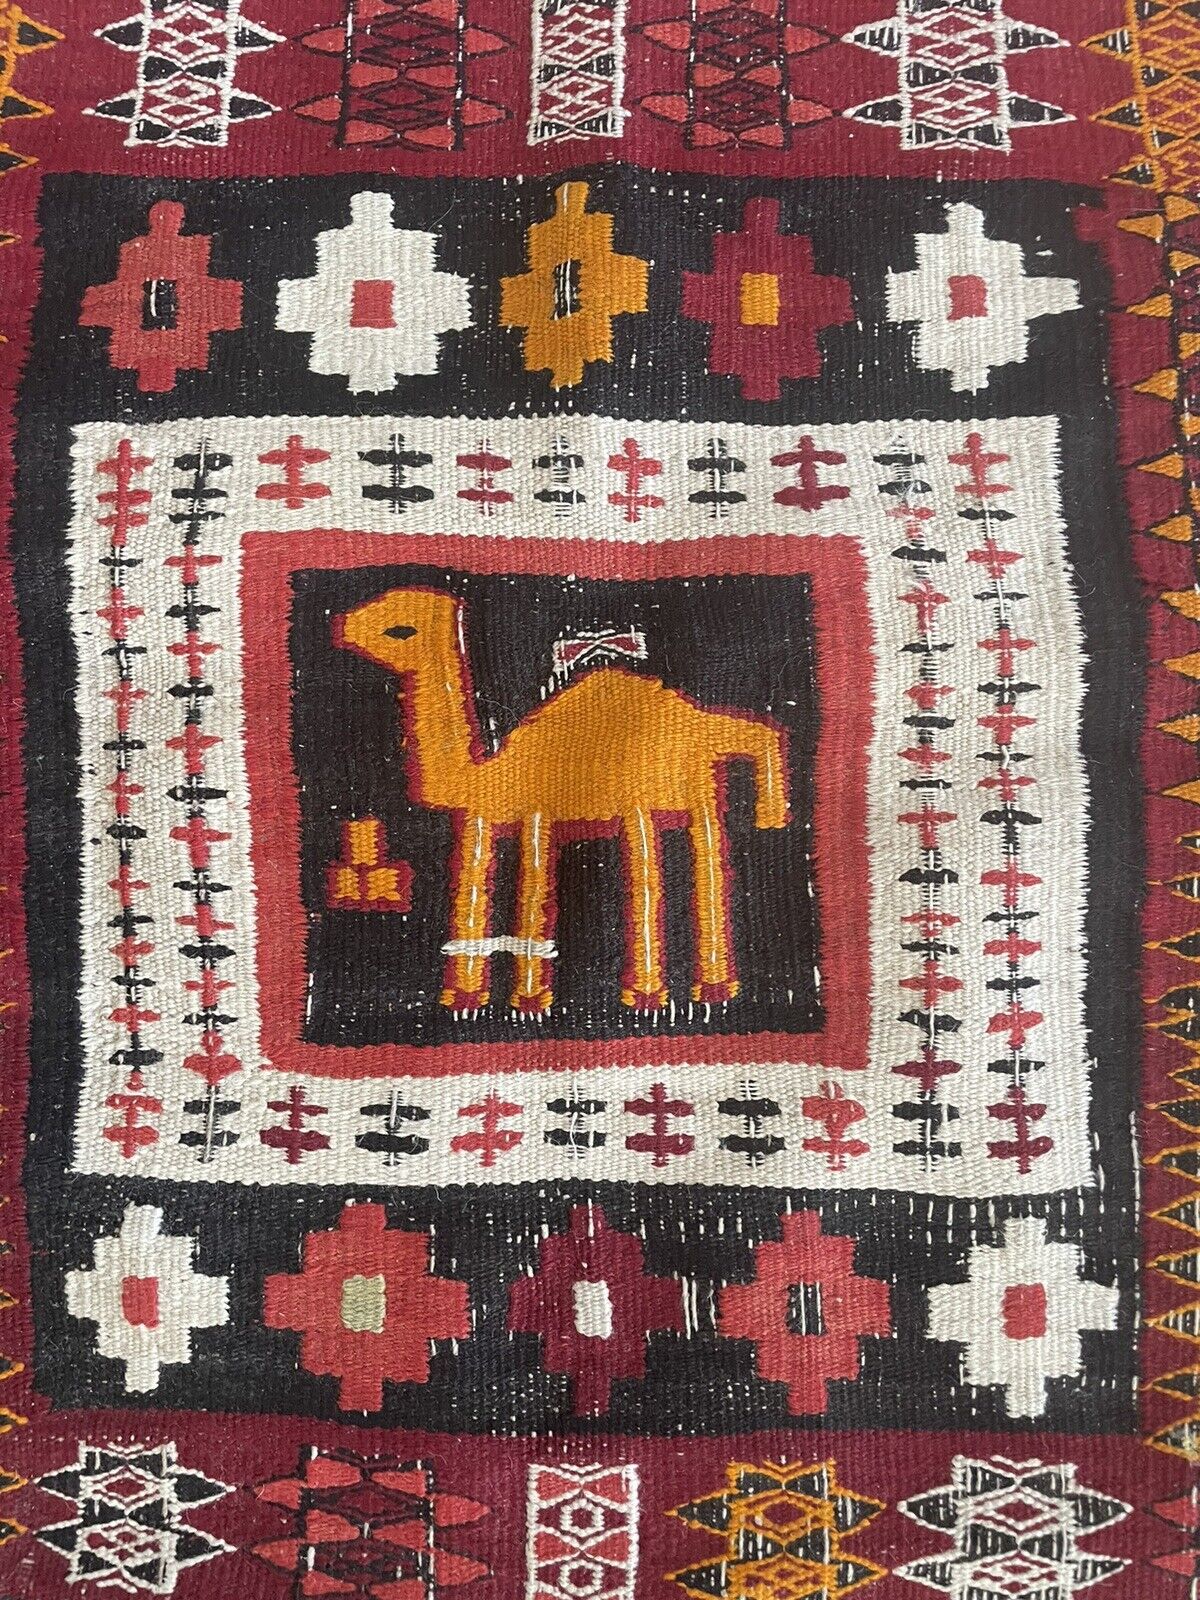 Close-up of color palette on Handmade Antique Moroccan Berber Kilim Rug - Detailed view showcasing the rich color palette of the rug, including dark red, black, white, yellow, and brown tones.